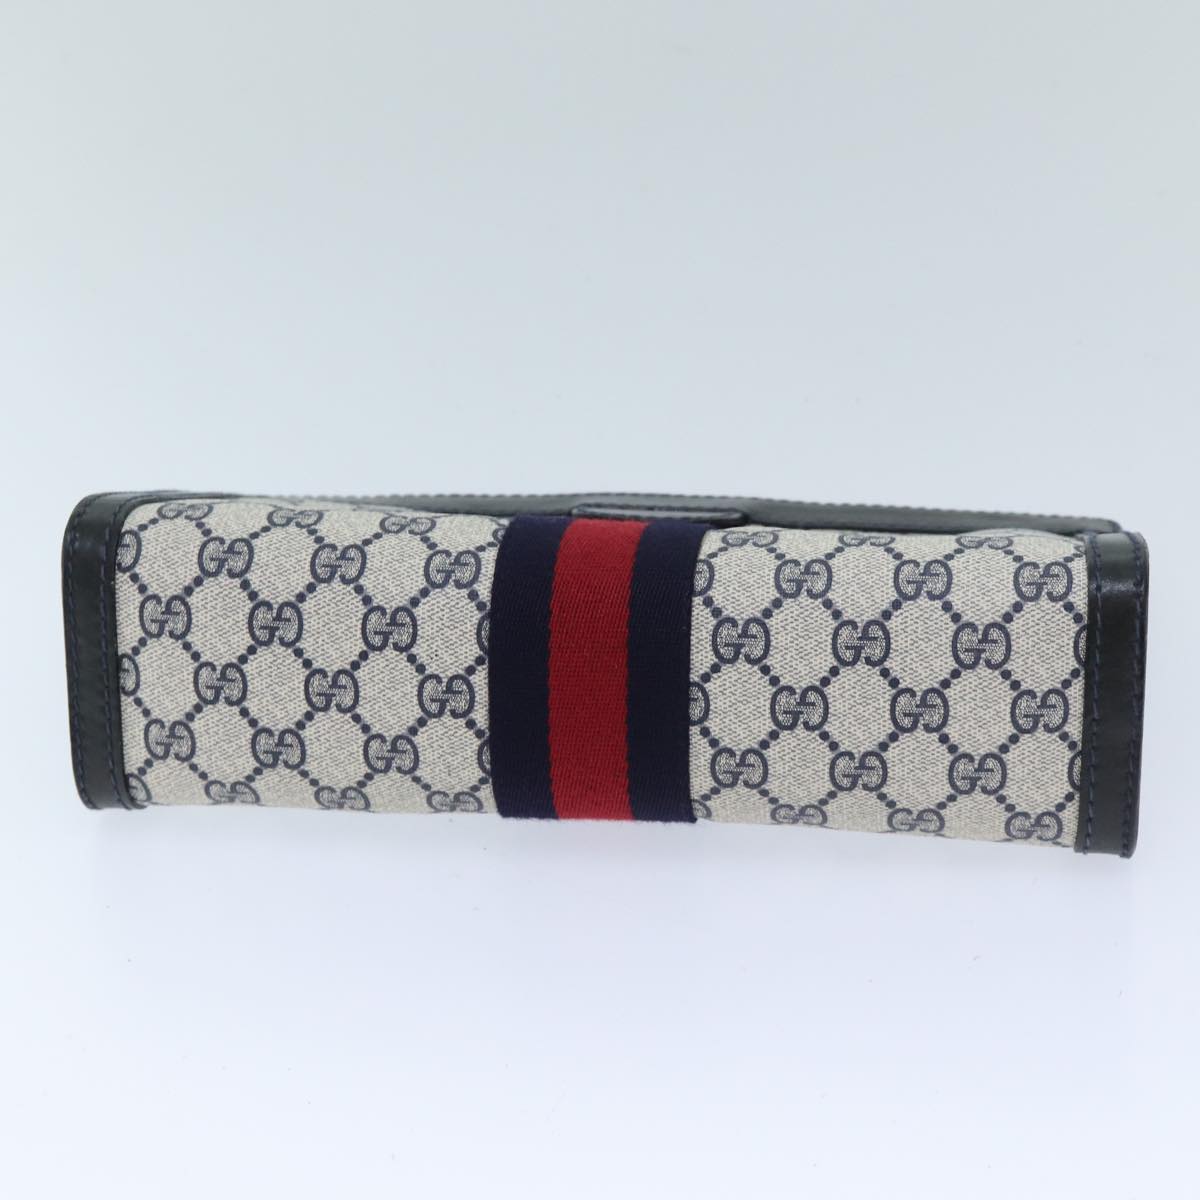 GUCCI GG Supreme Sherry Line Clutch Bag PVC Navy Red 010 378 Auth yk11431